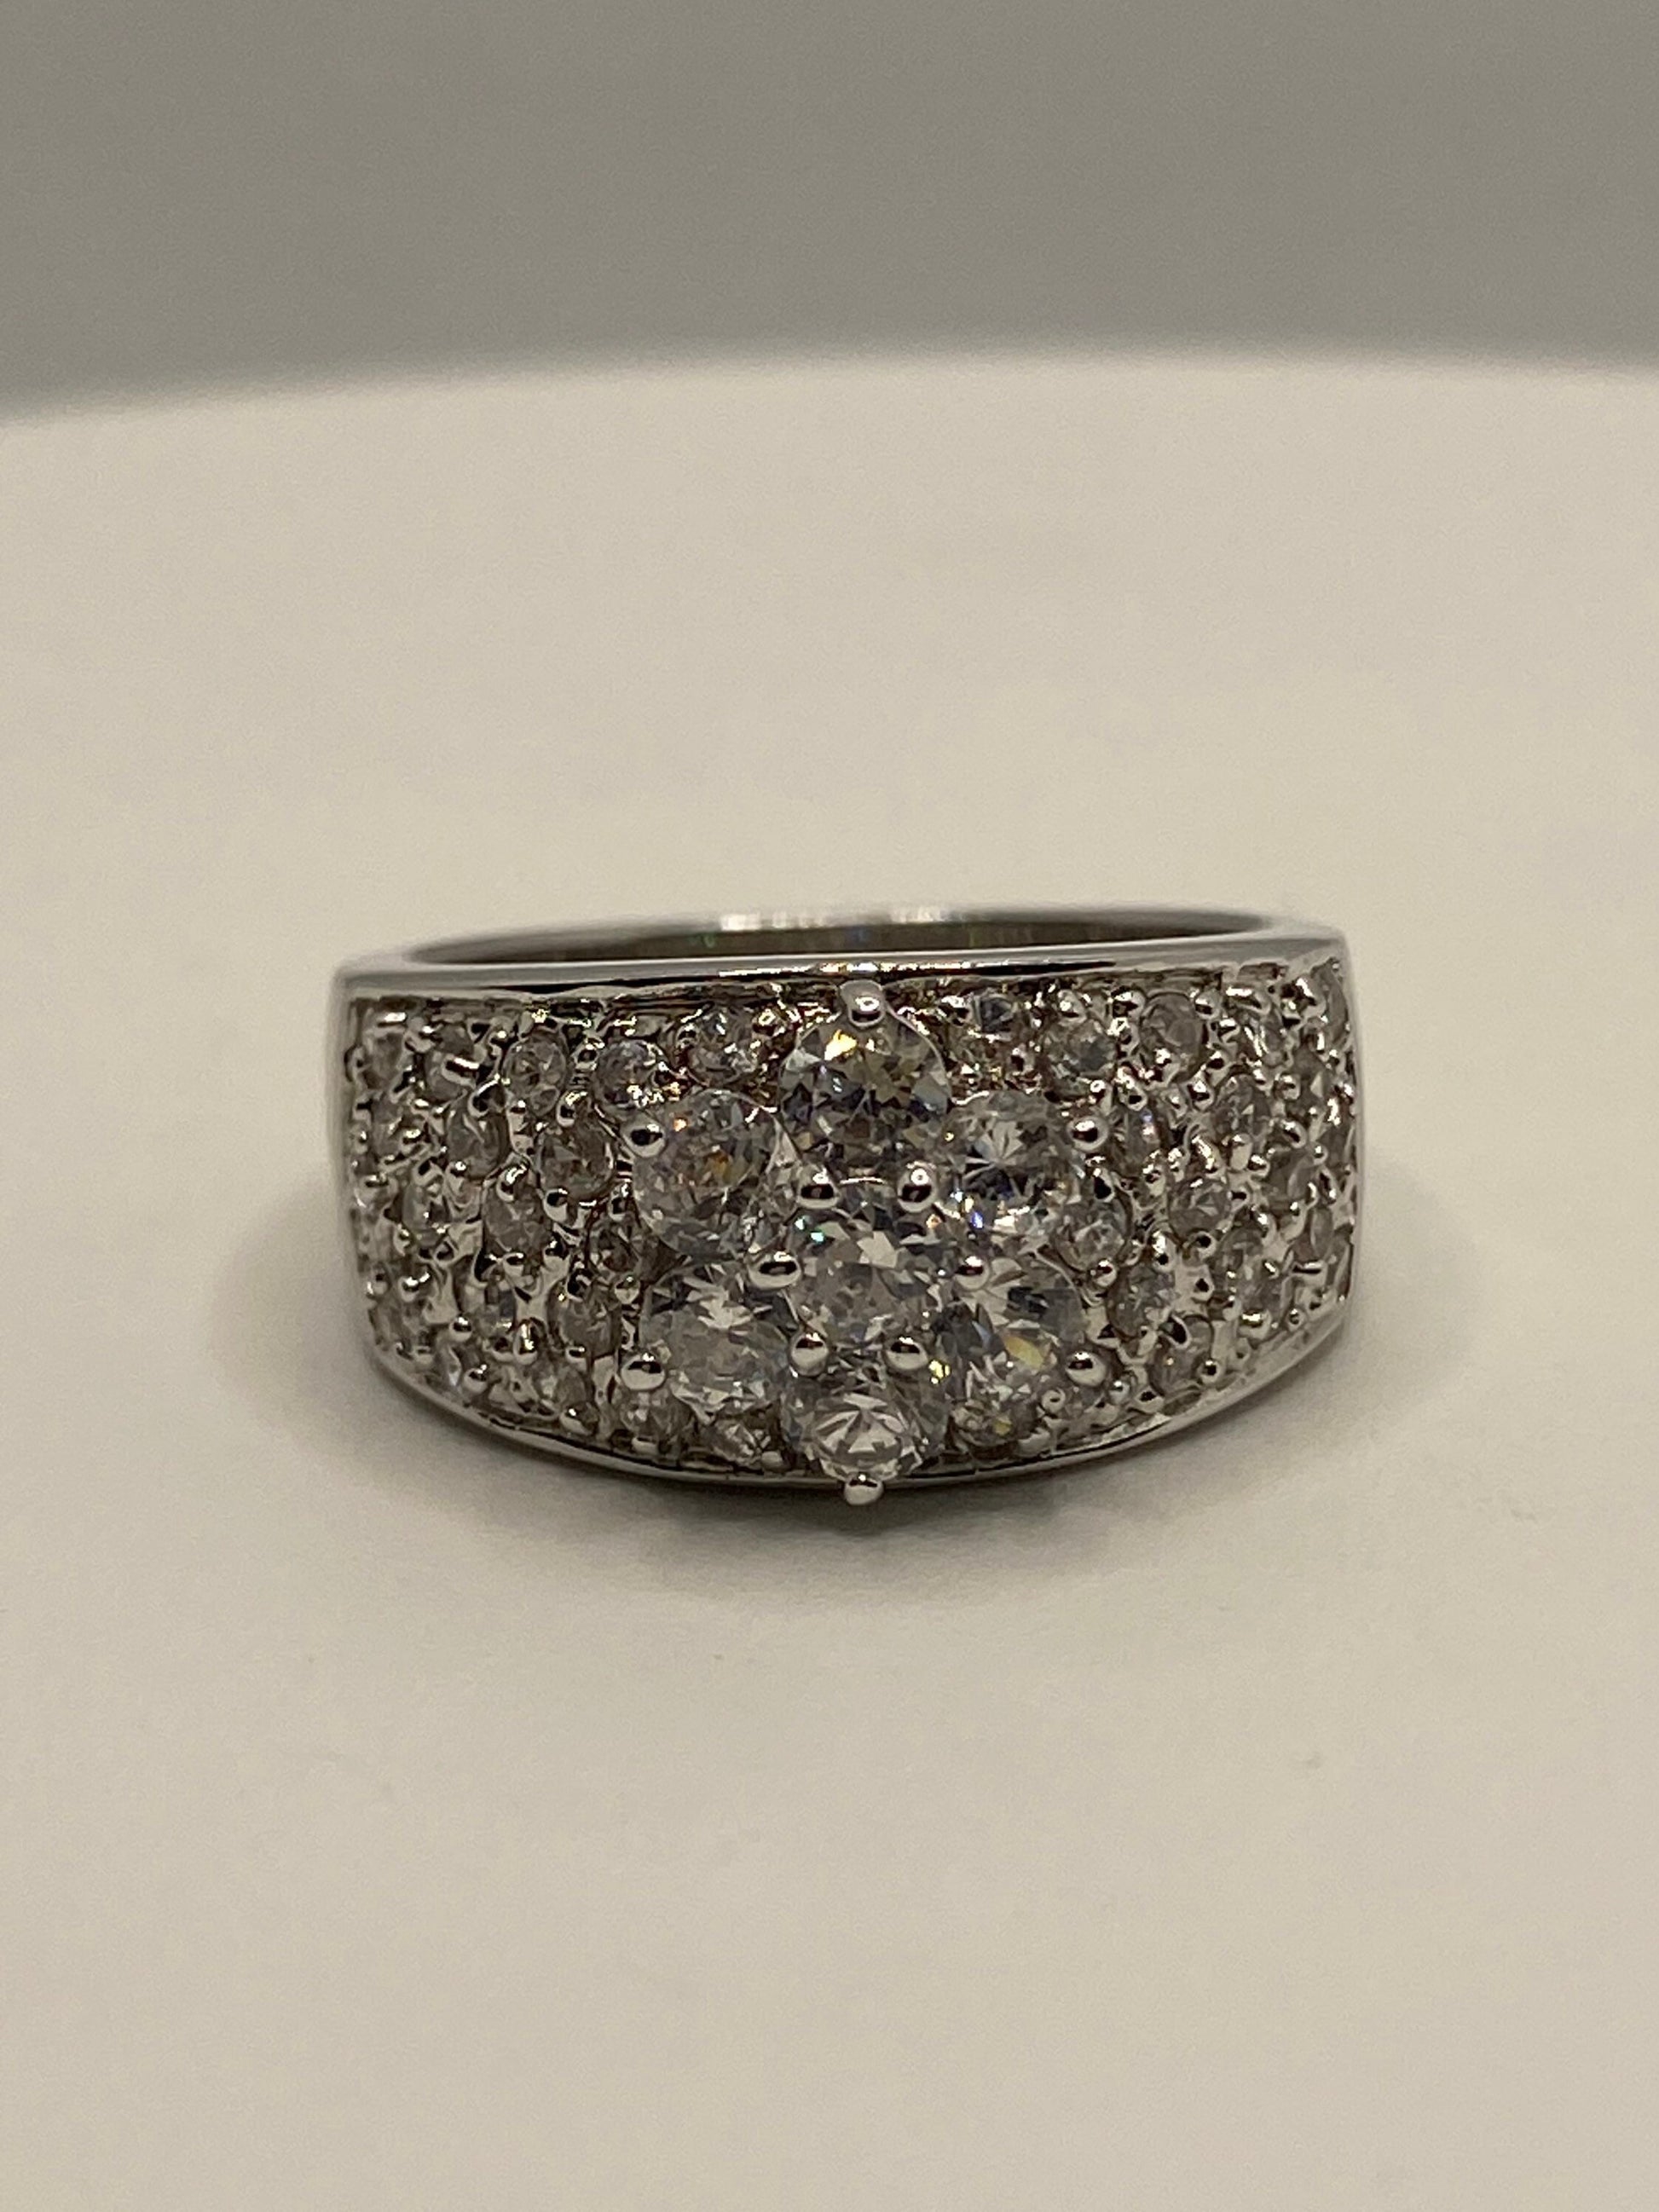 Vintage White Sapphire 925 Sterling Silver Wedding Band Ring